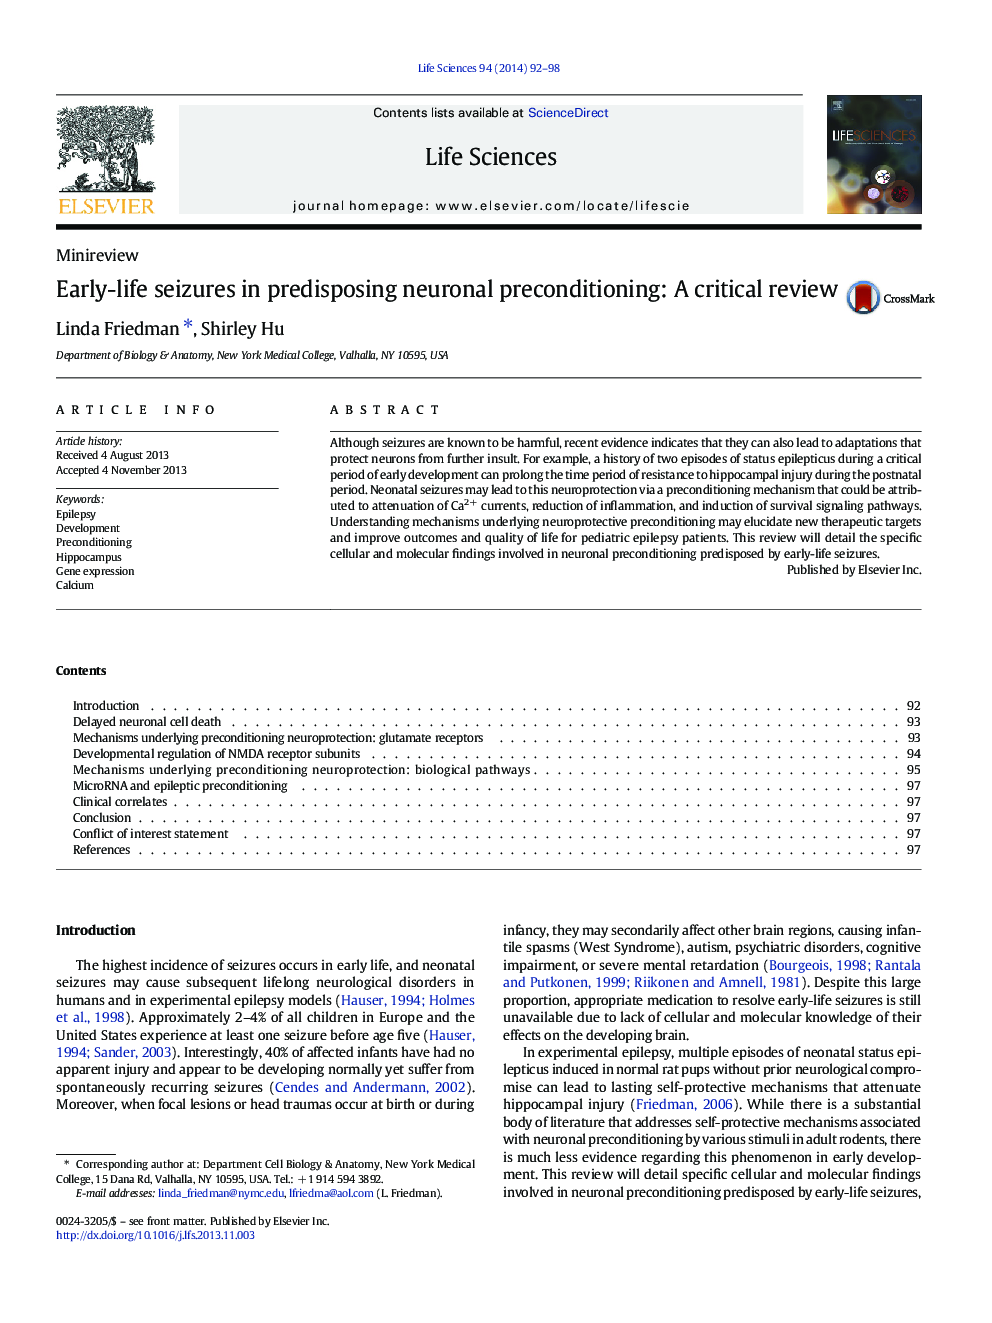 Early-life seizures in predisposing neuronal preconditioning: A critical review